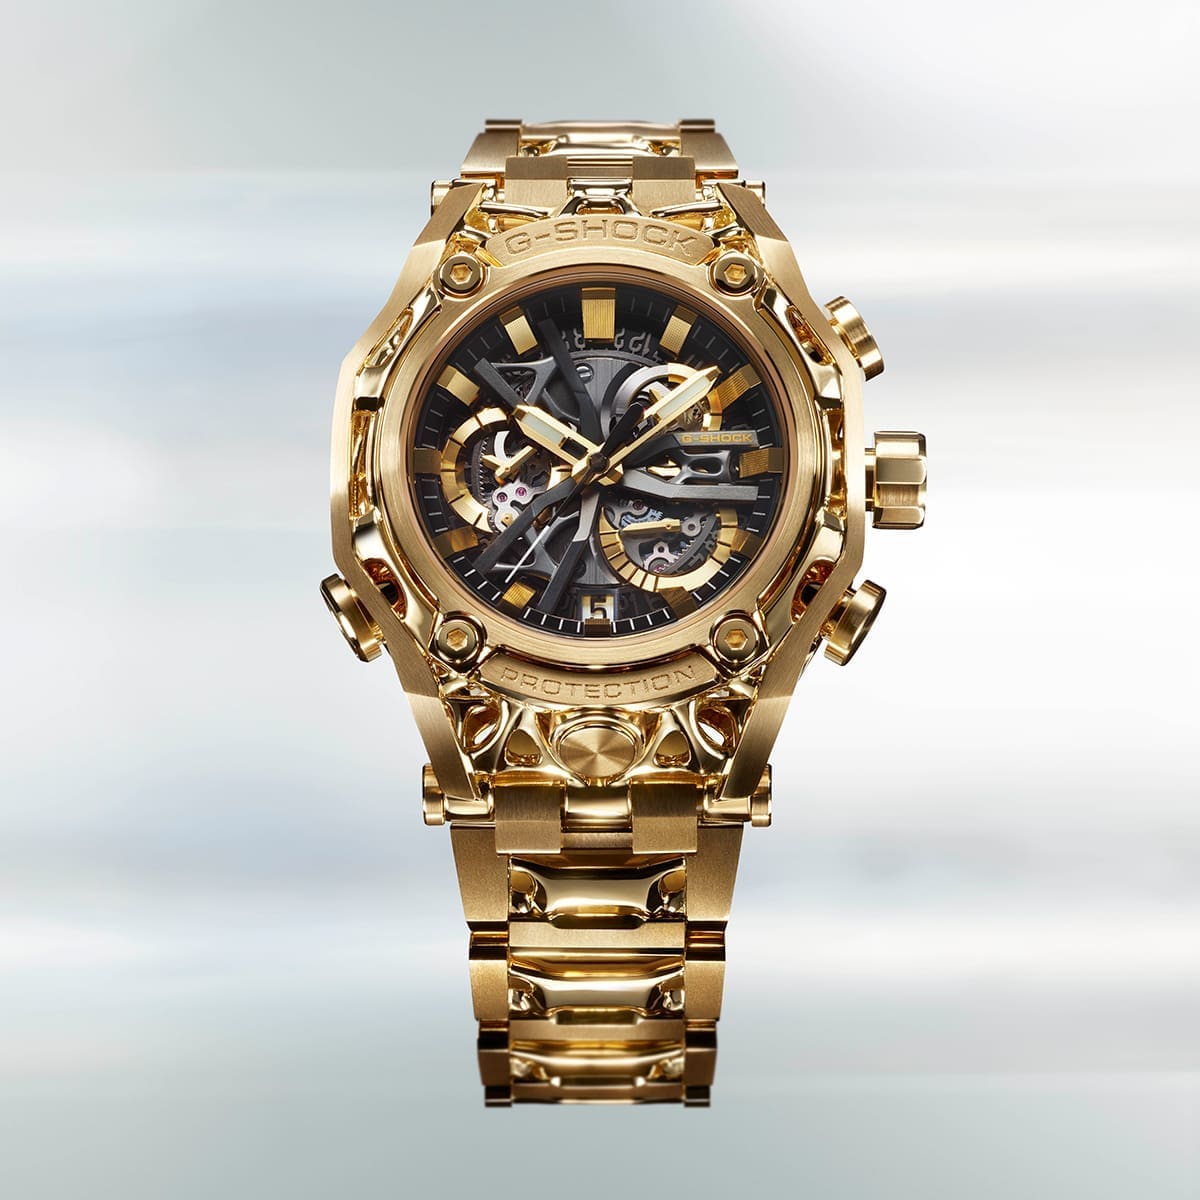 The most expensive G-SHOCK ever sold + Breitling acquires Universal Genève